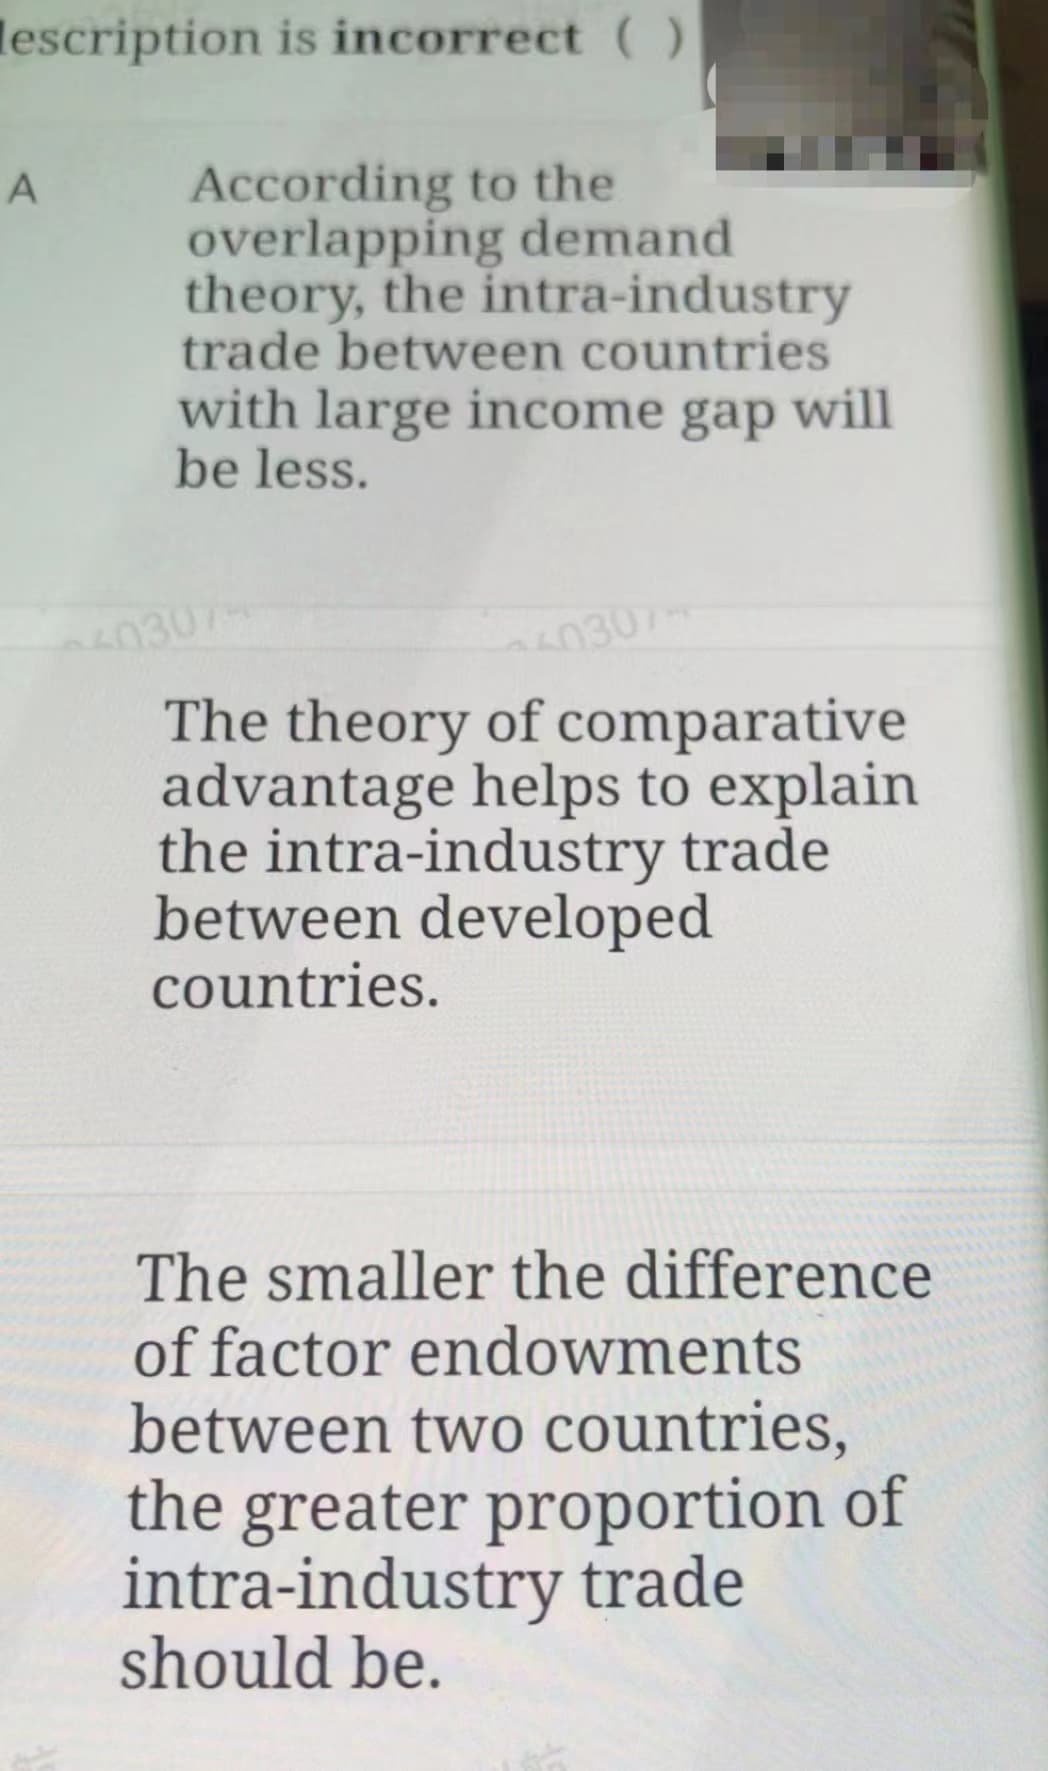 lescription is incorrect ( )
A
According to the
overlapping demand
theory, the intra-industry
trade between countries
with large income gap will
be less.
0307
The theory of comparative
advantage helps to explain
the intra-industry trade
between developed
countries.
The smaller the difference
of factor endowments
between two countries,
the greater proportion of
intra-industry trade
should be.